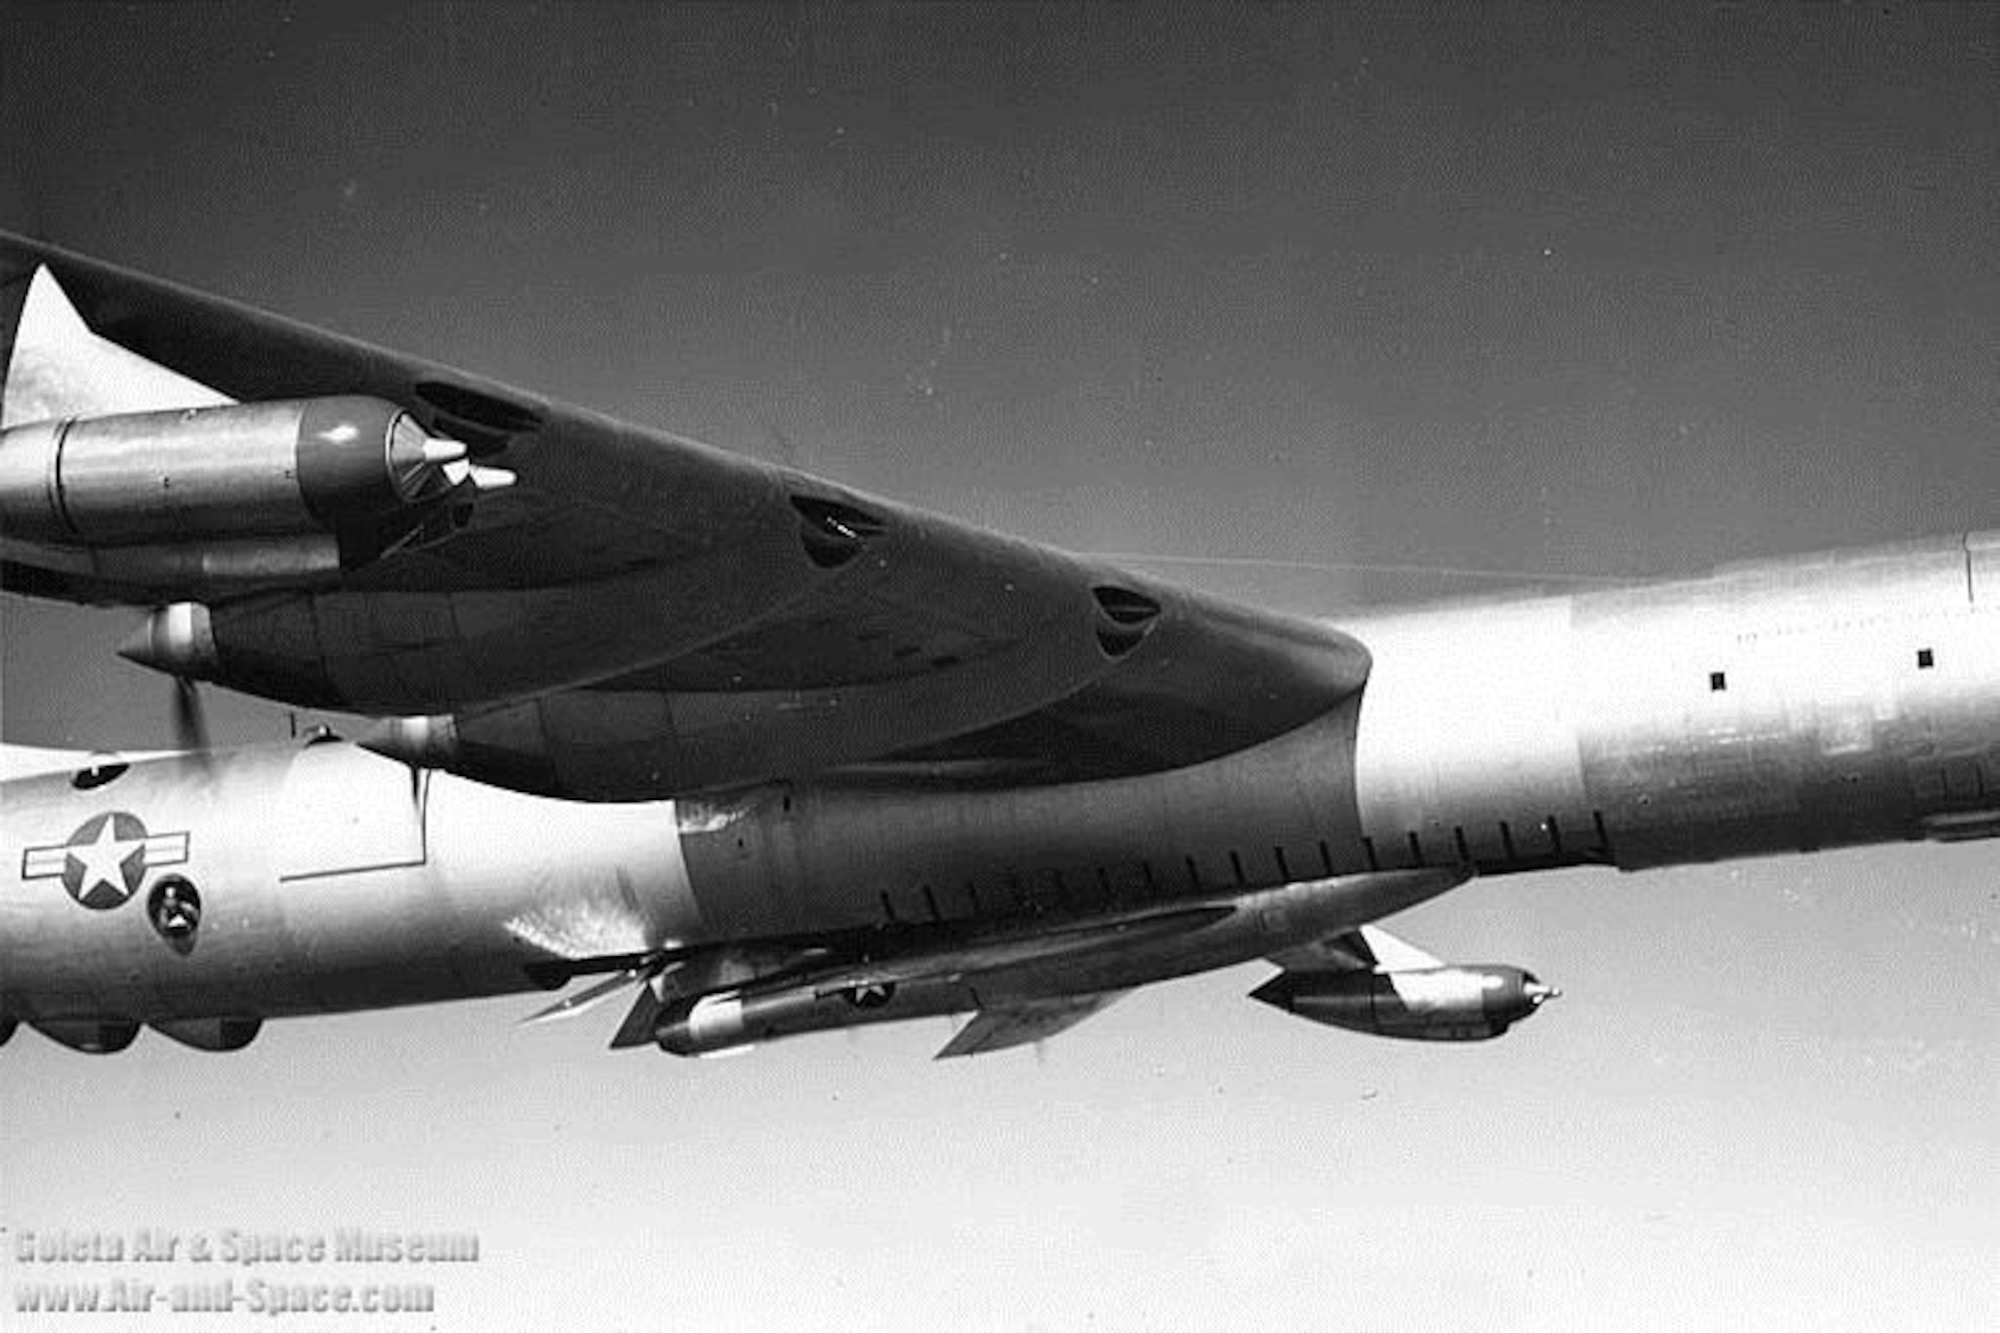 The parasite fighter nestled in the belly of the GRB-36 Peacemaker. (U.S. Air Force photo)